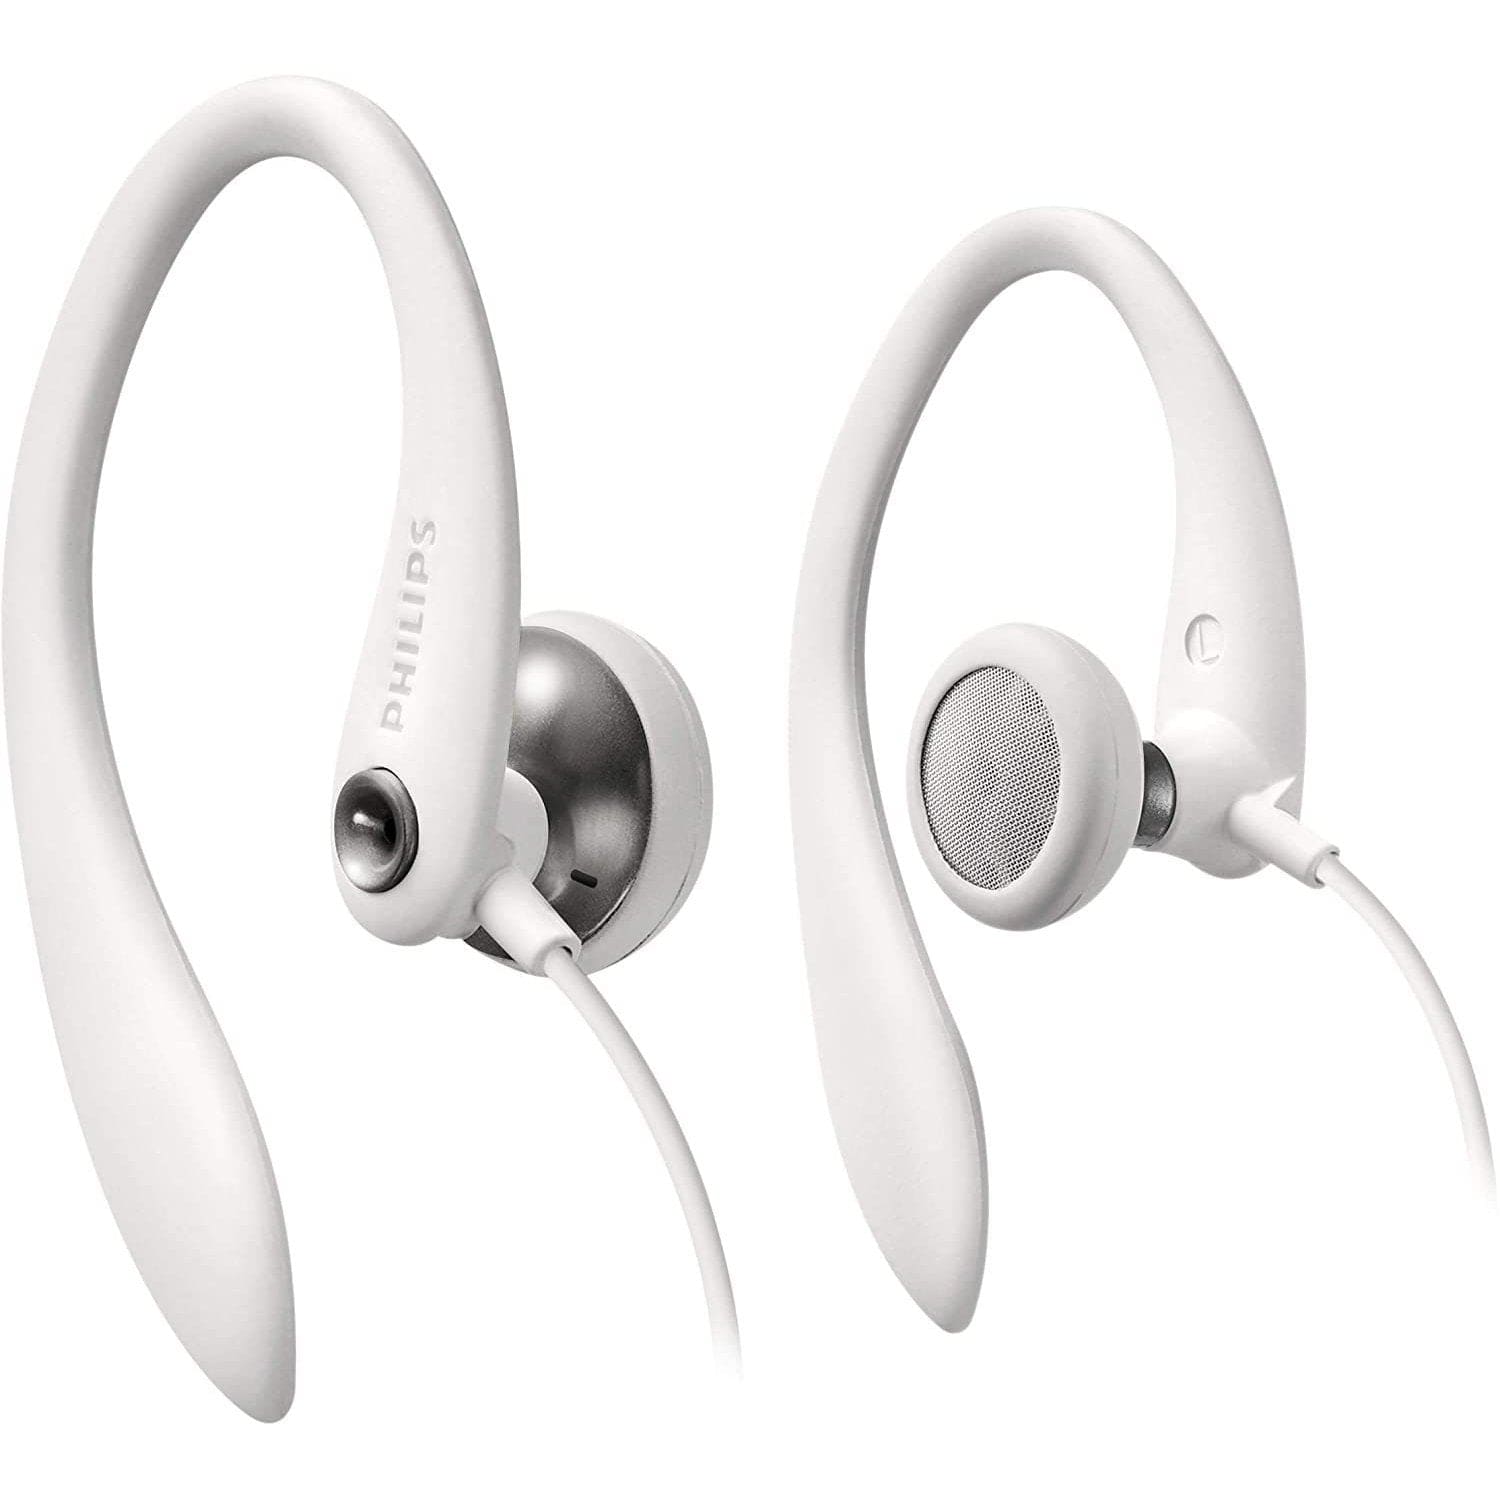 PHILIPS SPORTS HEADPHONES SHS3300WT/10 IN-EAR SPORTS HEADPHONES - WHITE [ACCESSORIES]